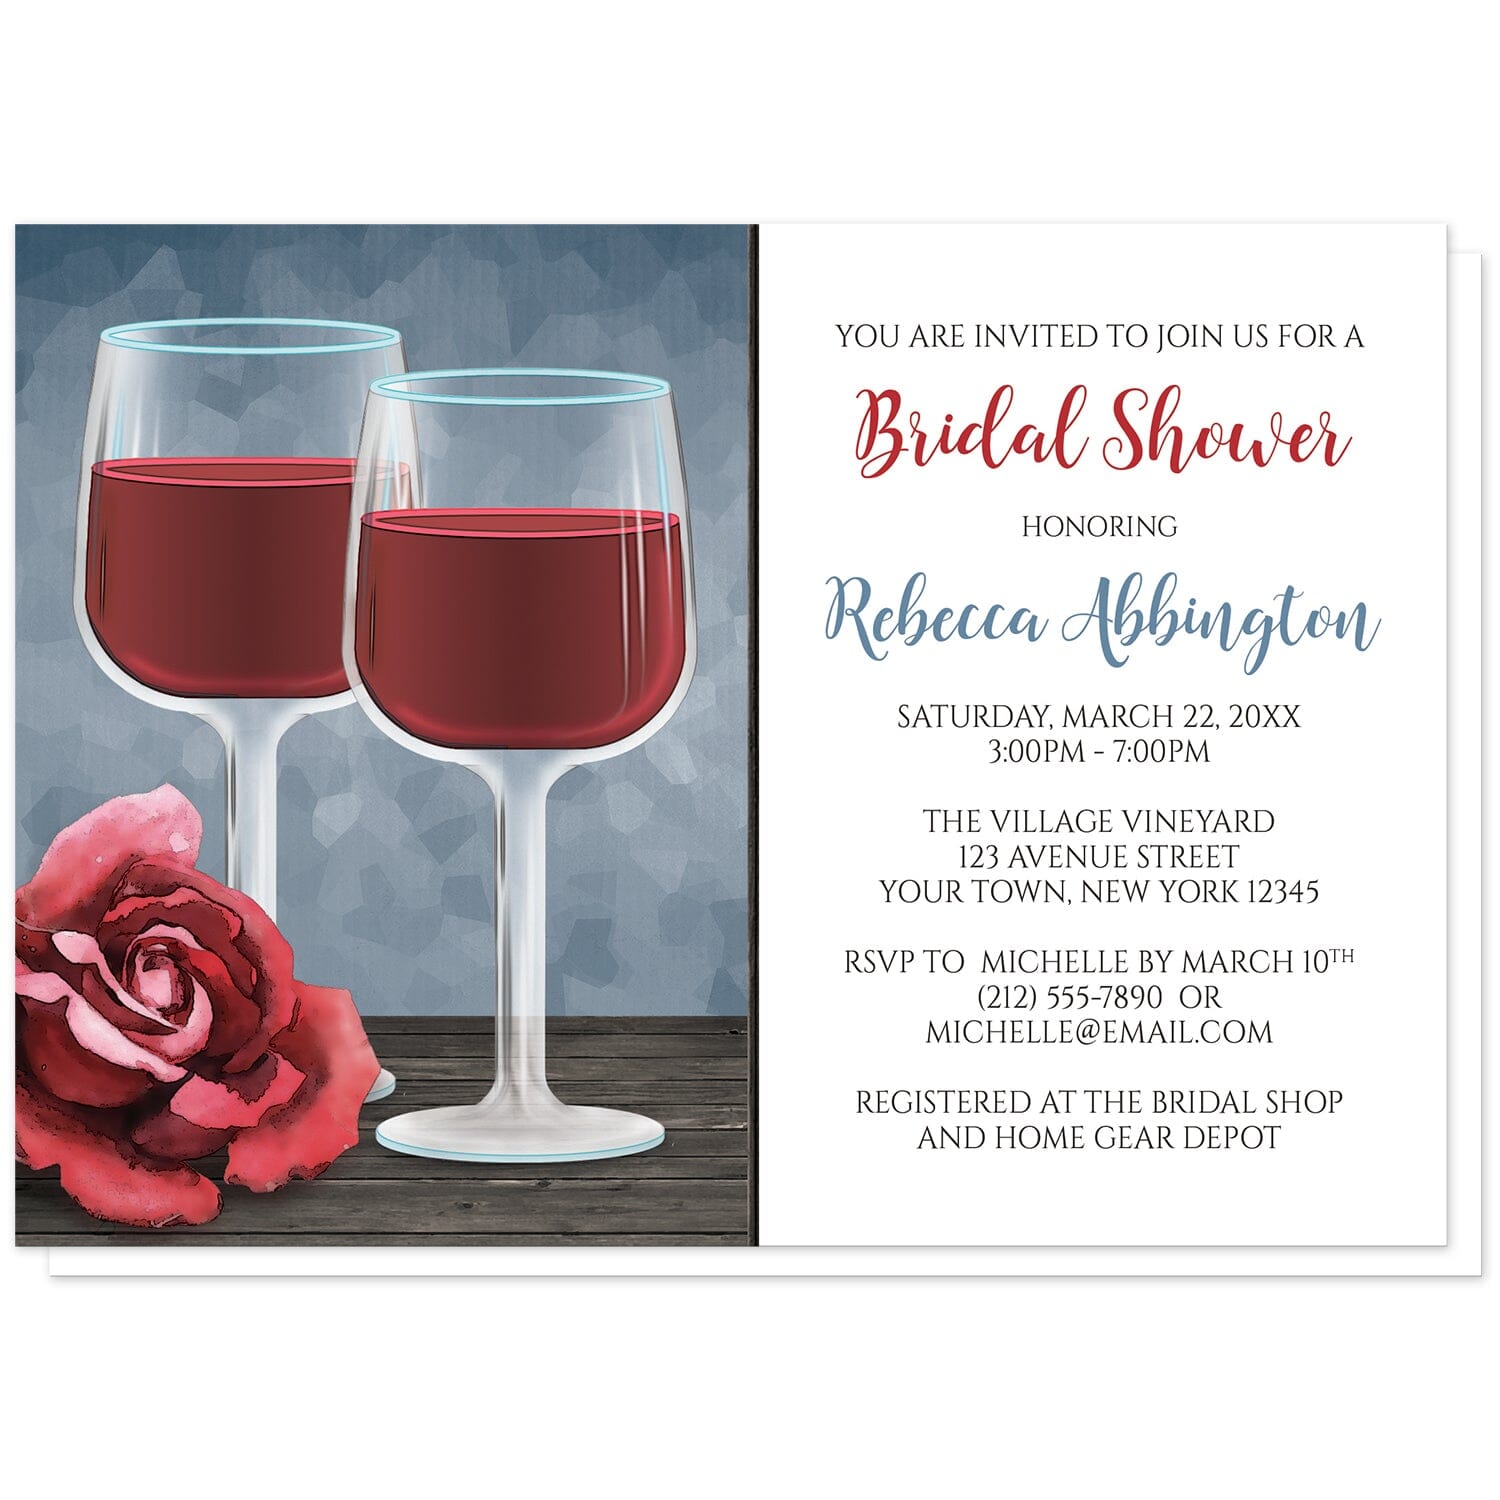 Red Wine Glasses Floral Rose Bridal Shower Invitations at Artistically Invited. Uniquely illustrated red wine glasses floral rose bridal shower invitations with two wine glasses filled with red wine on a wooden table with a red rose over a blue background design. Your personalized bridal shower celebration details are printed in red, blue, and dark brown over a white area to the right of the wine glass illustration.